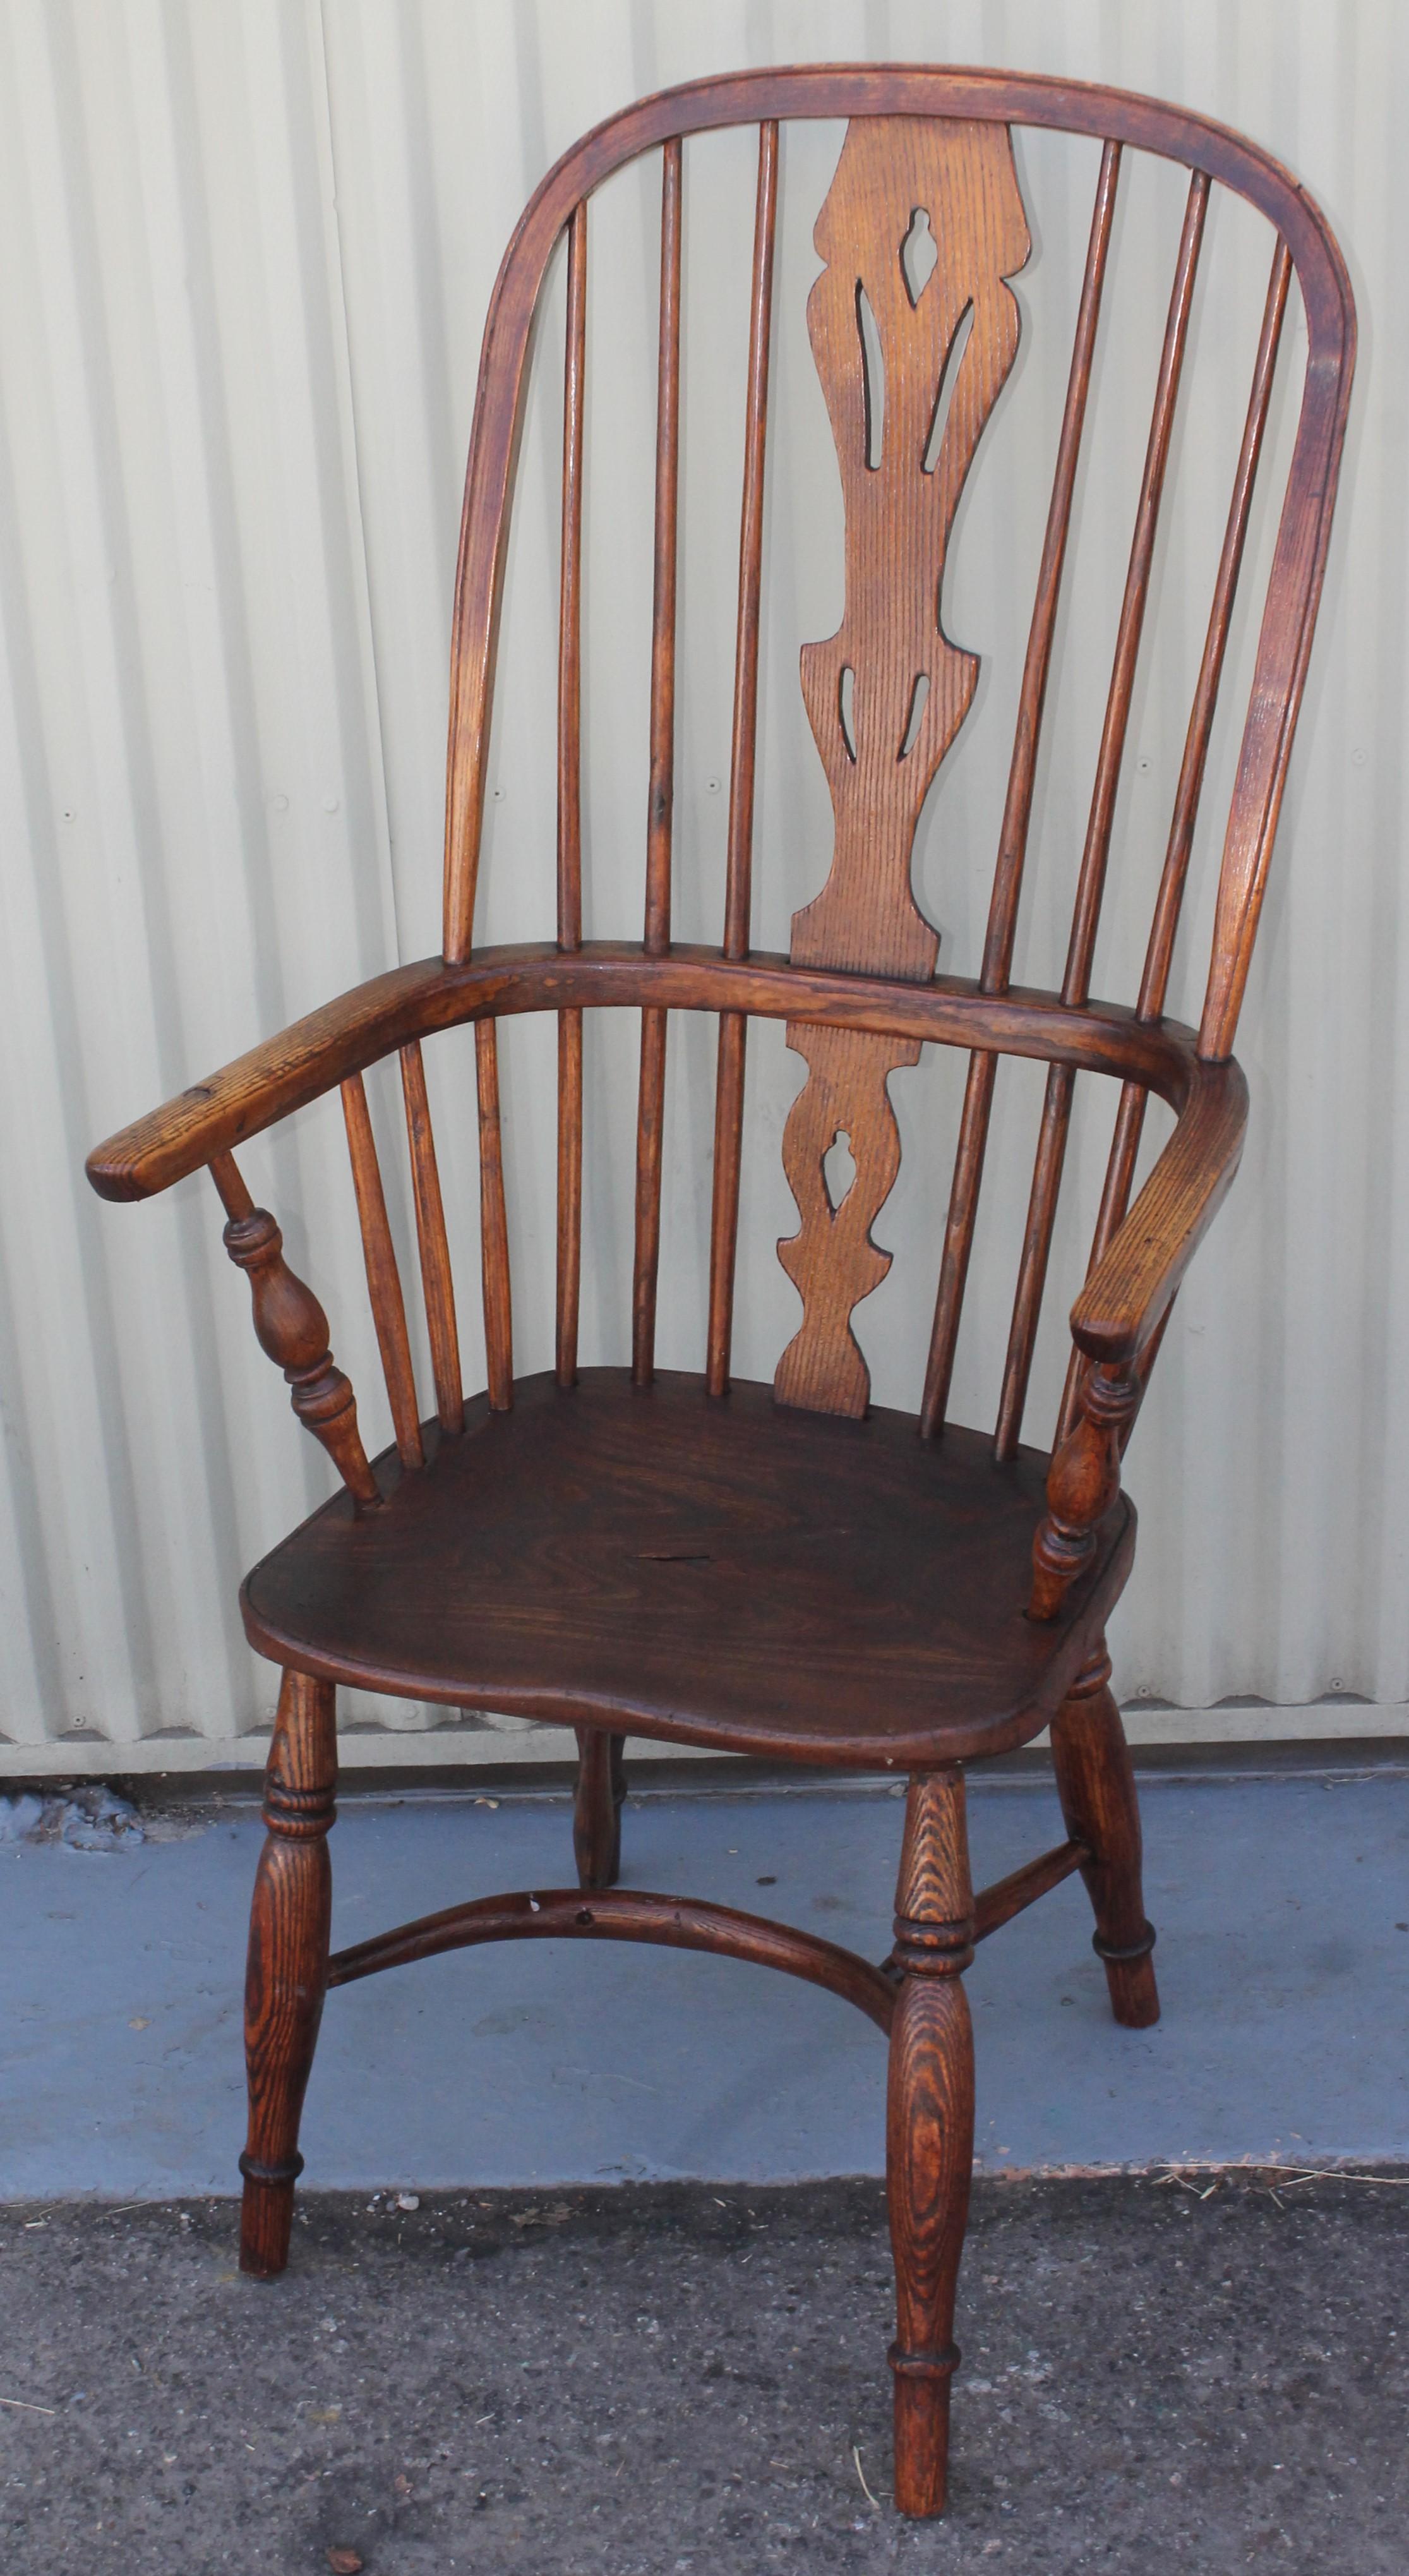 This fine English Windsor armchair has a amazing untouched patina and looks a little off center from age and use. The condition is good with marks and wear consistent from age and use. Its a handmade and carved chair so it is not perfectly centered.